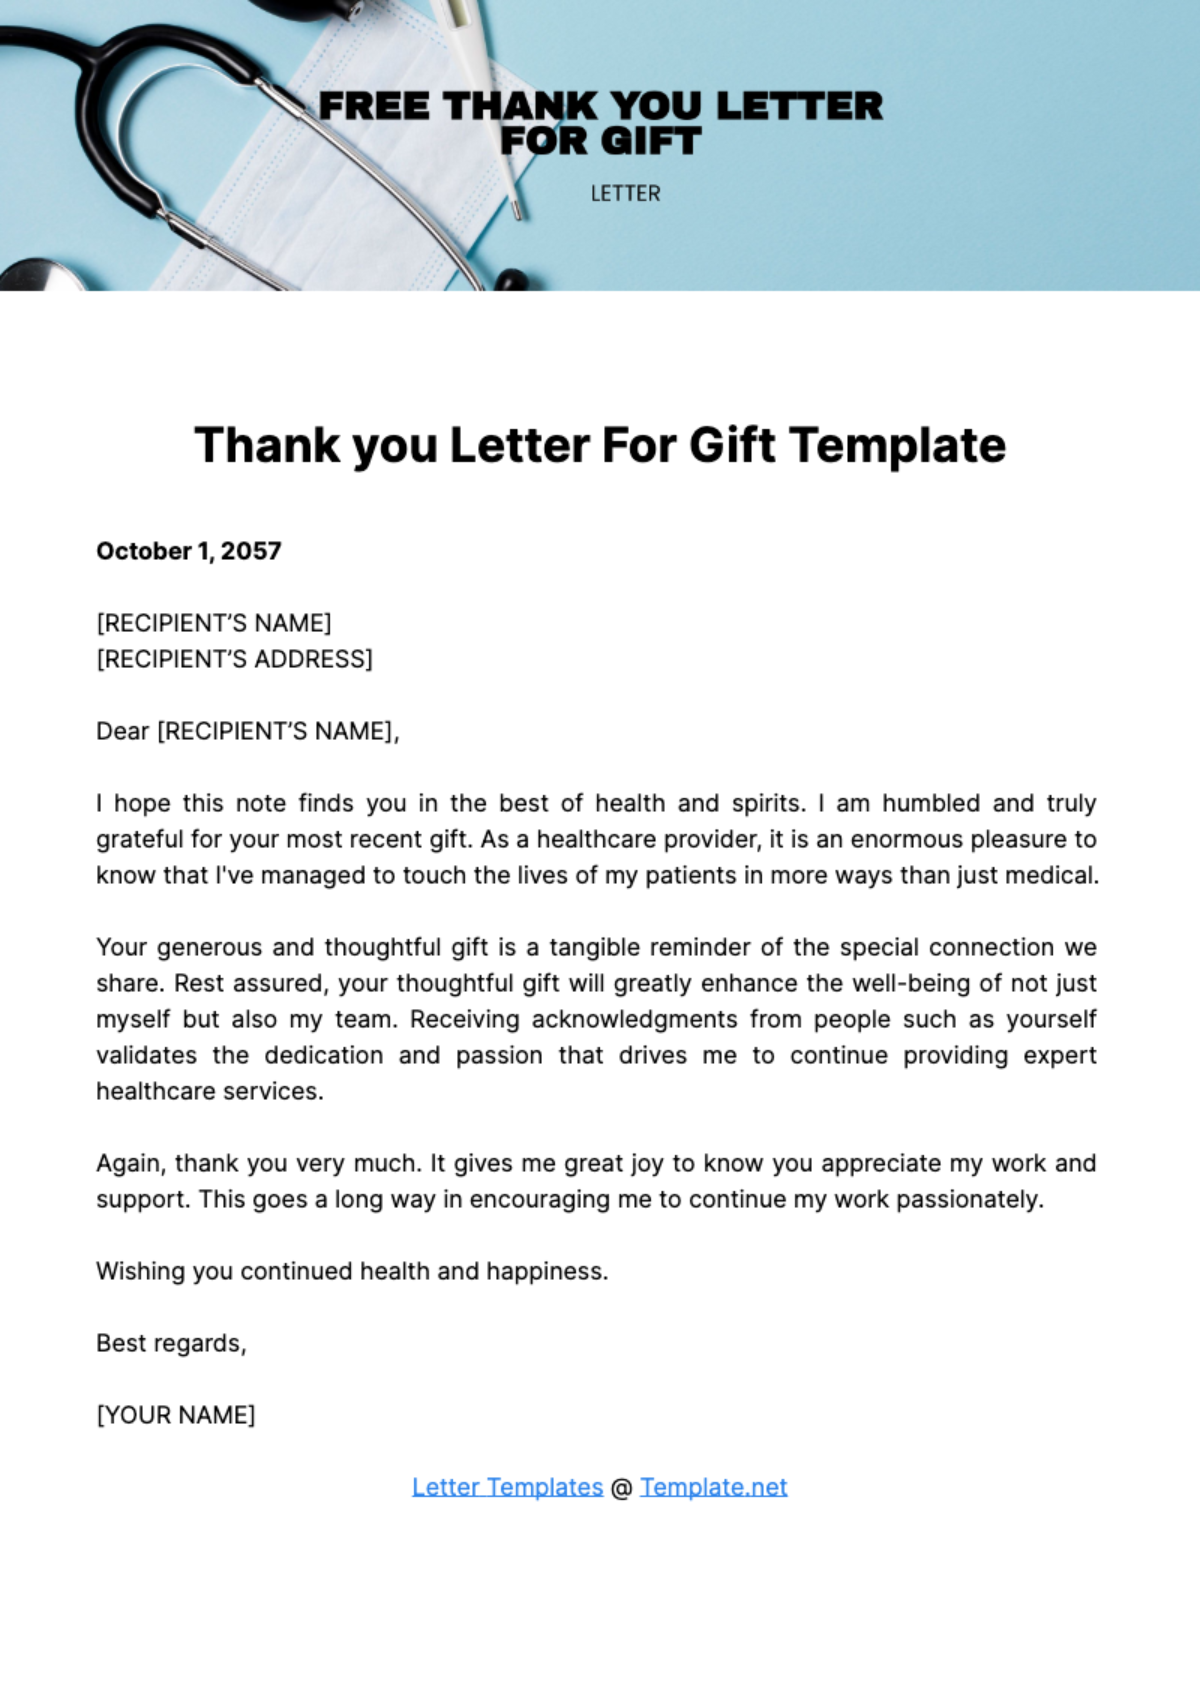 Free Thank you Letter for Gift Template